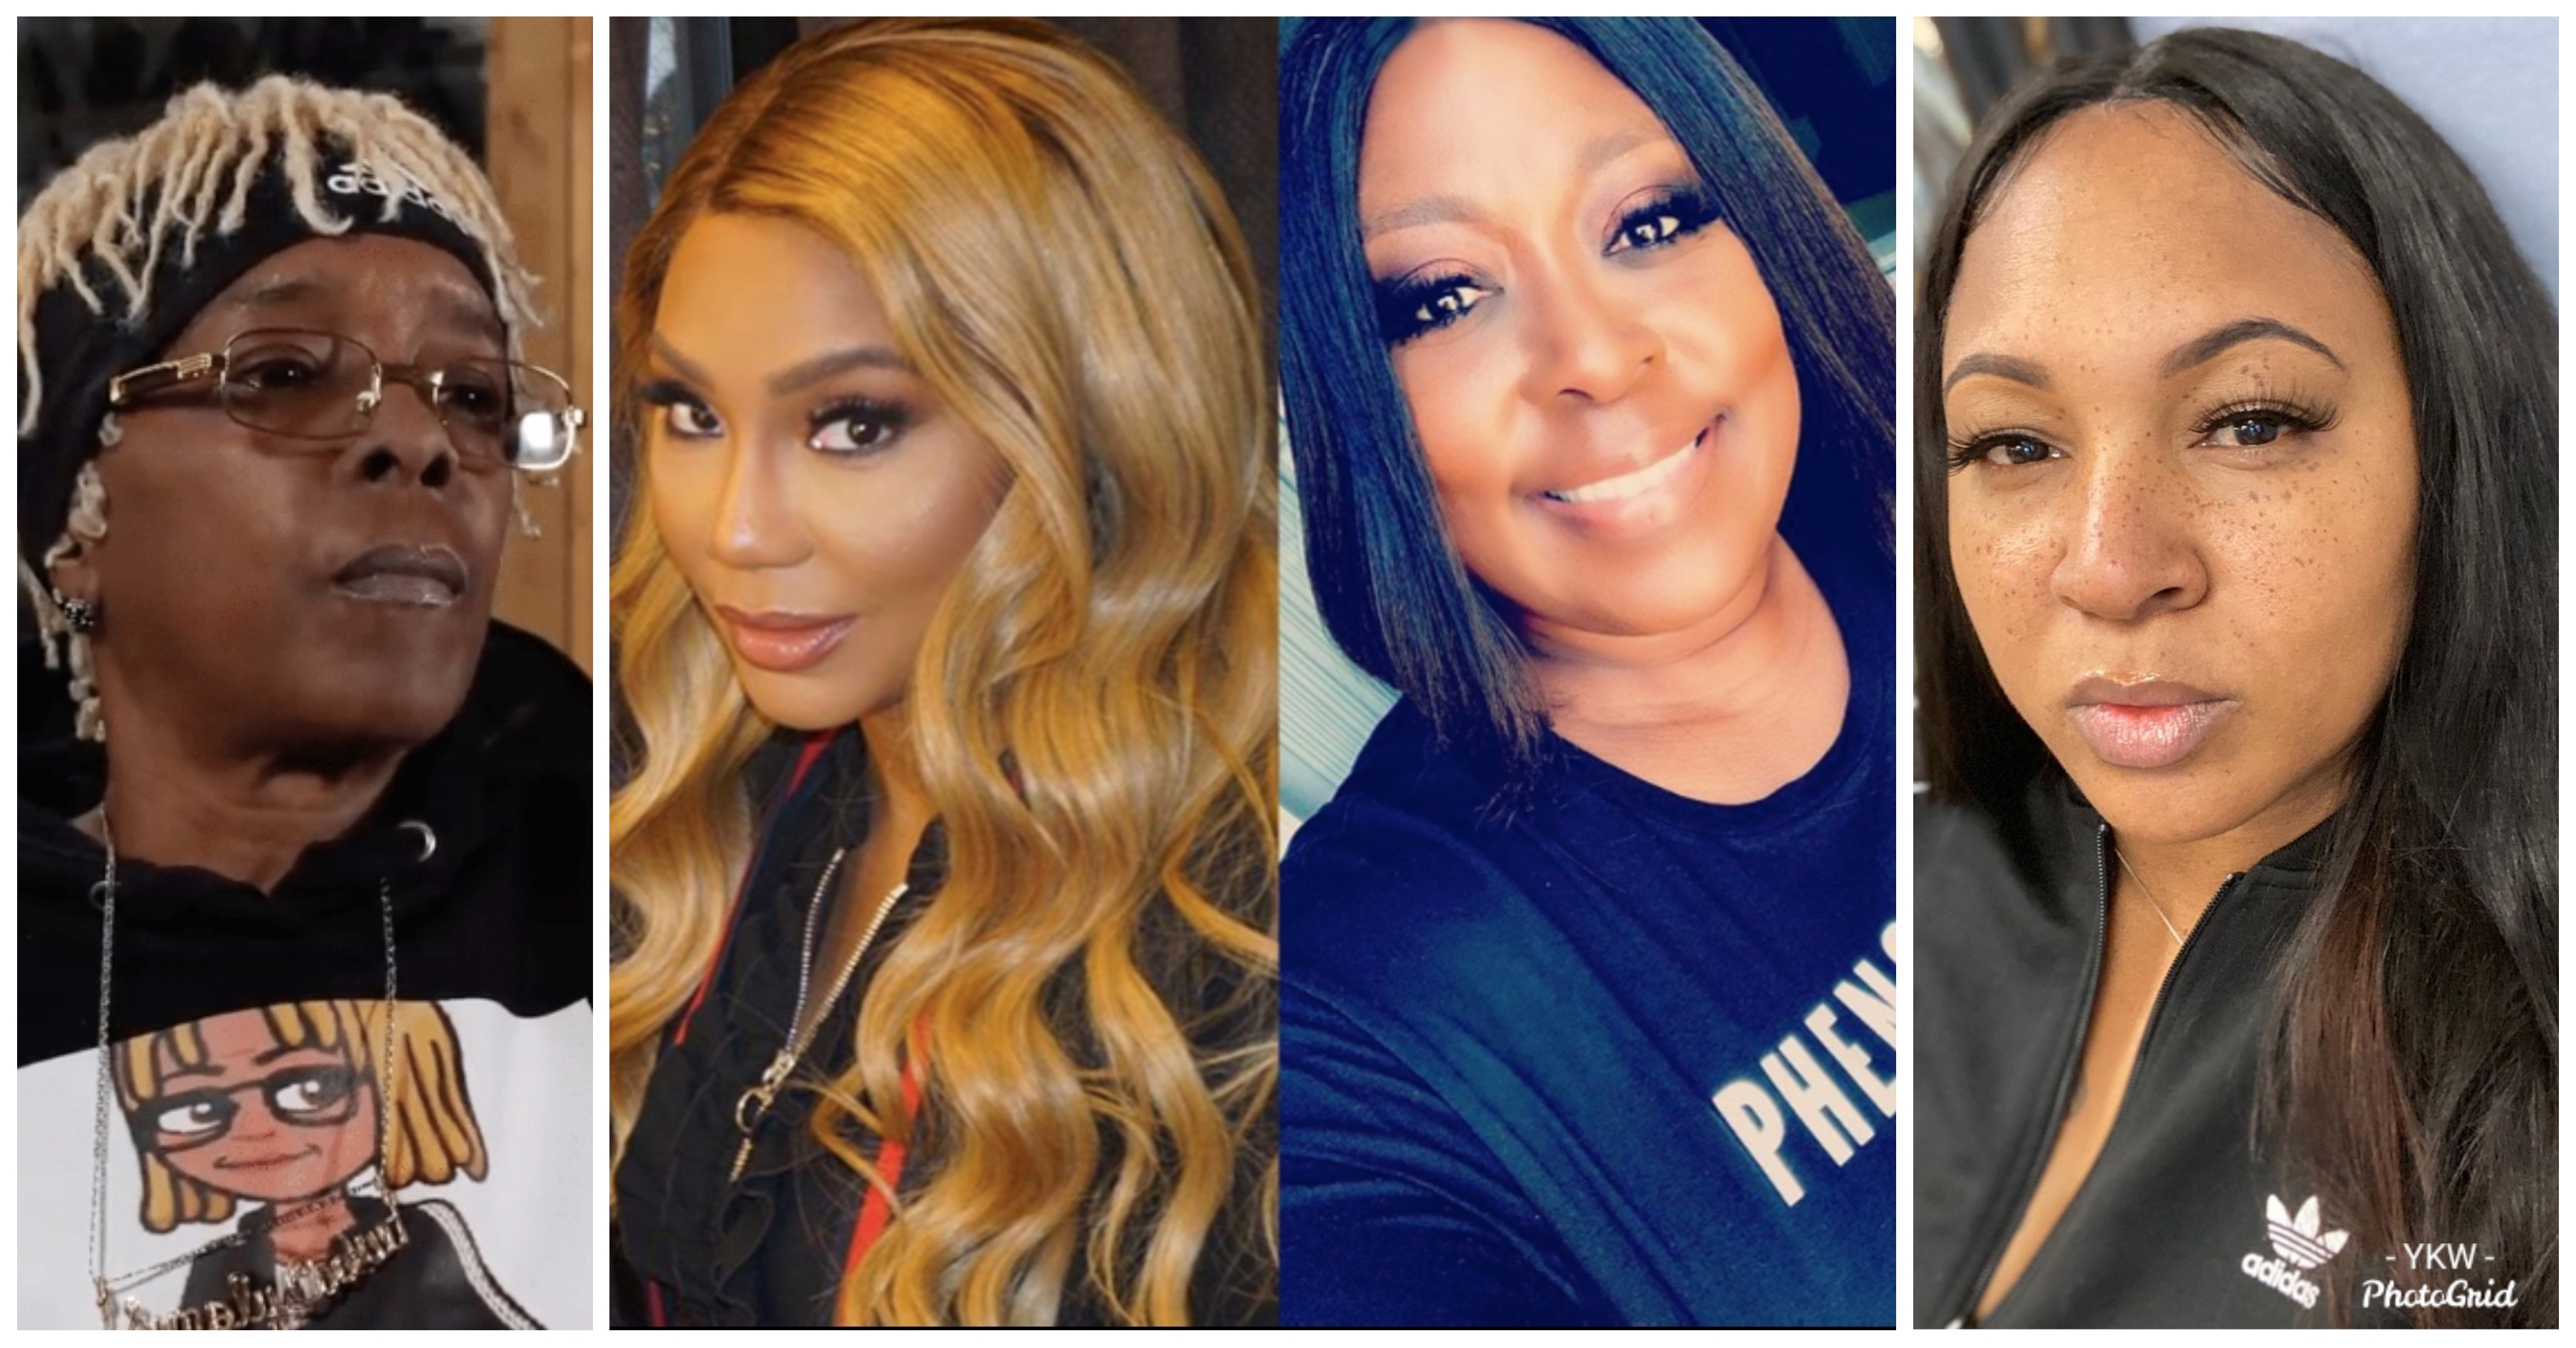 Loni Love Exposed Again For Allegedly Lying About Getting Tamar Braxton Fired From “The Real”